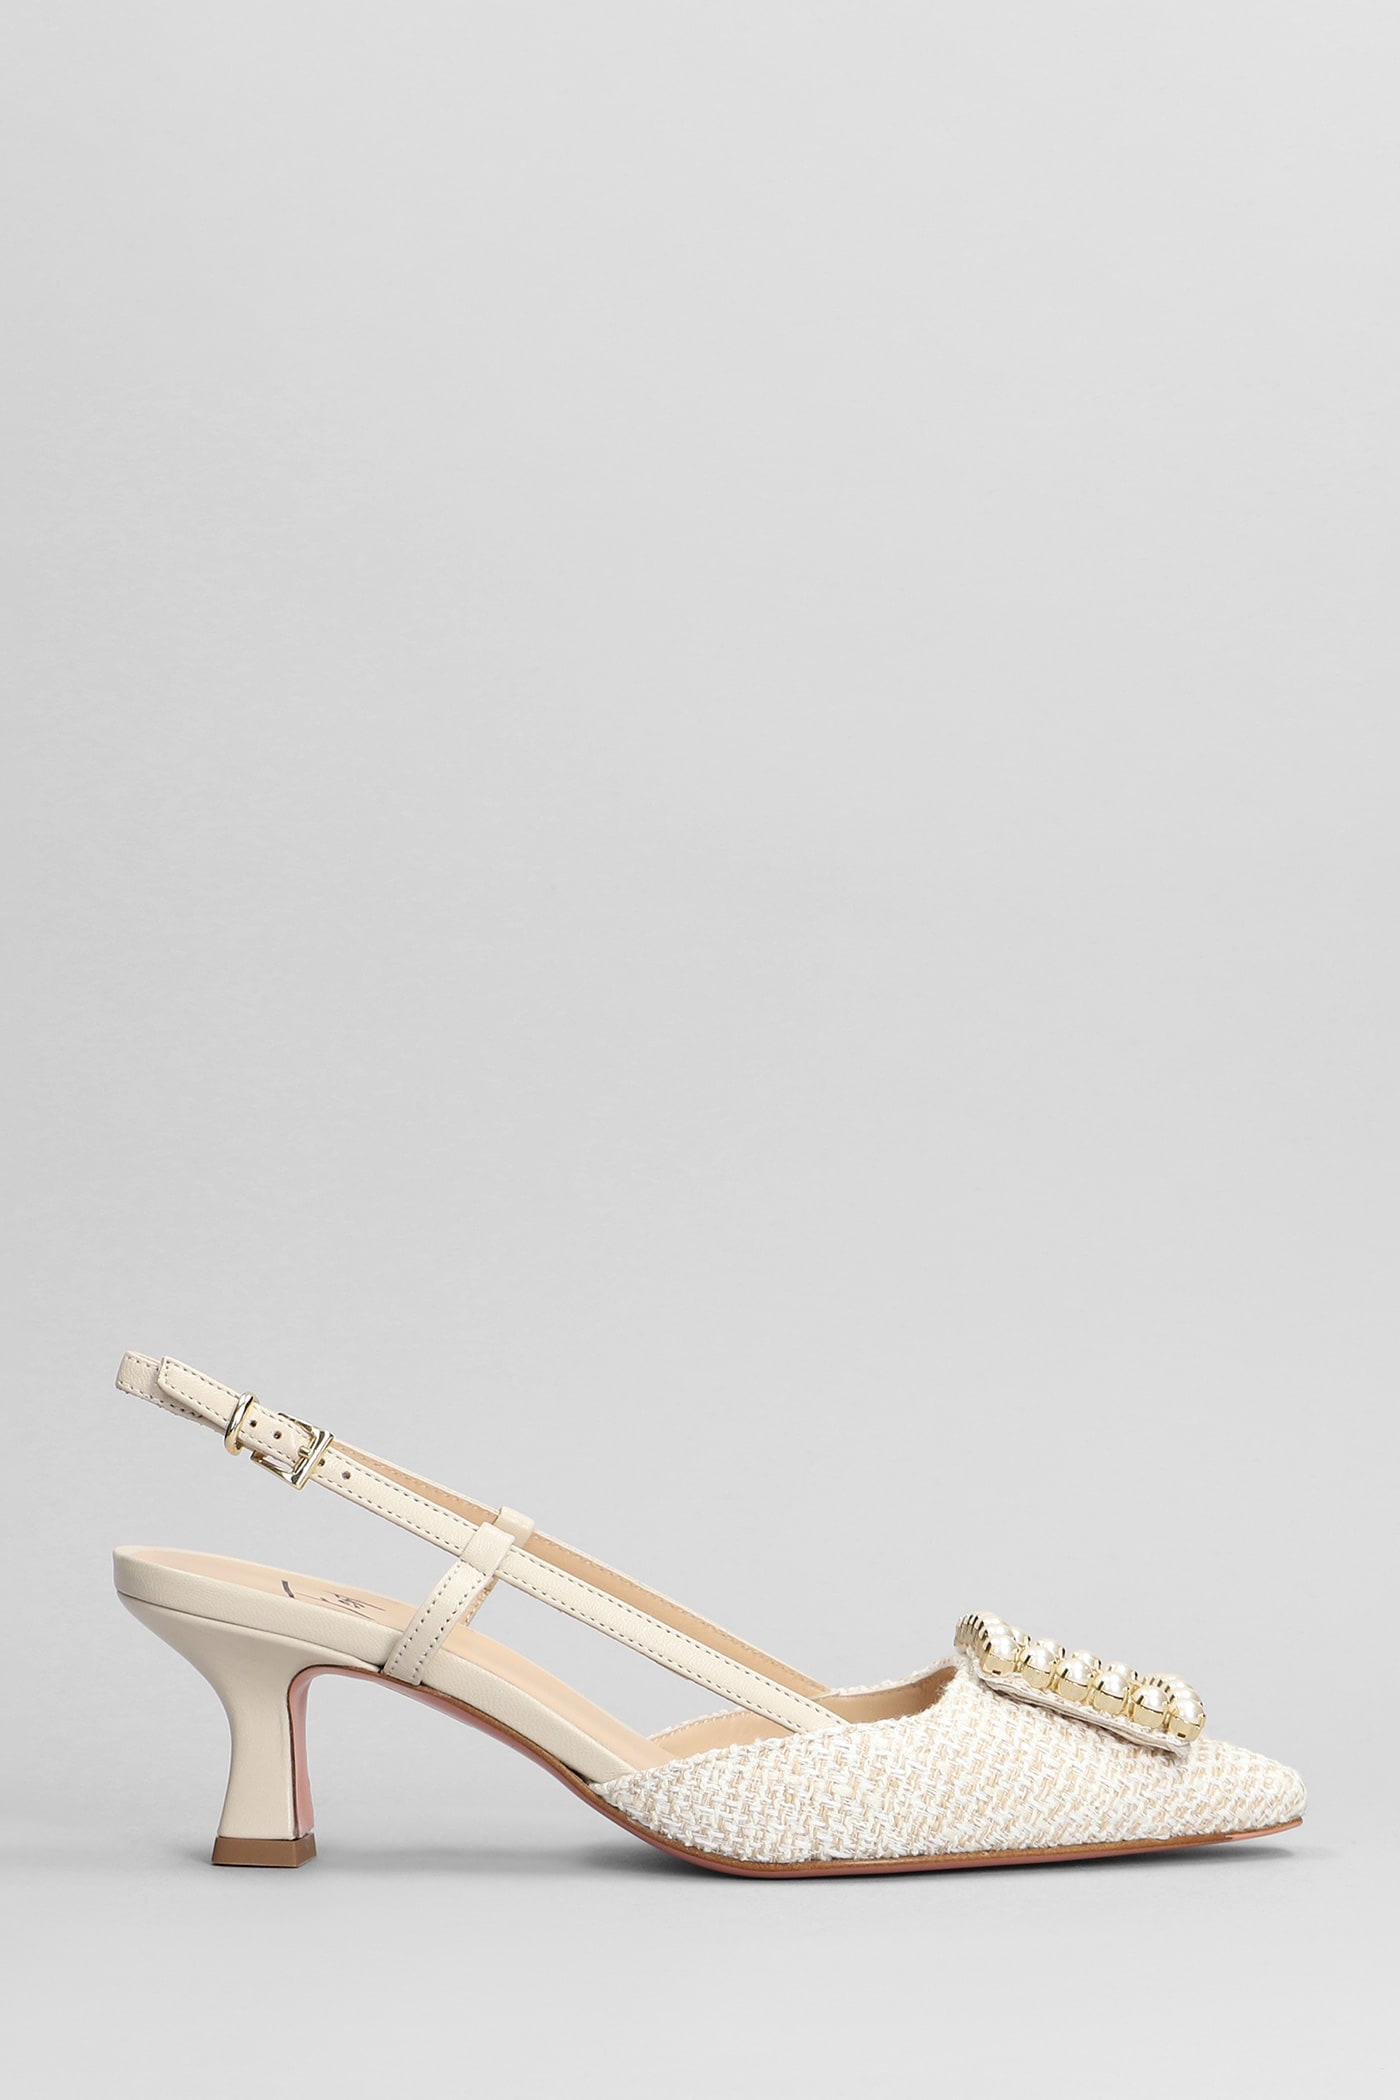 Stefi Pumps In Beige Leather And Fabric